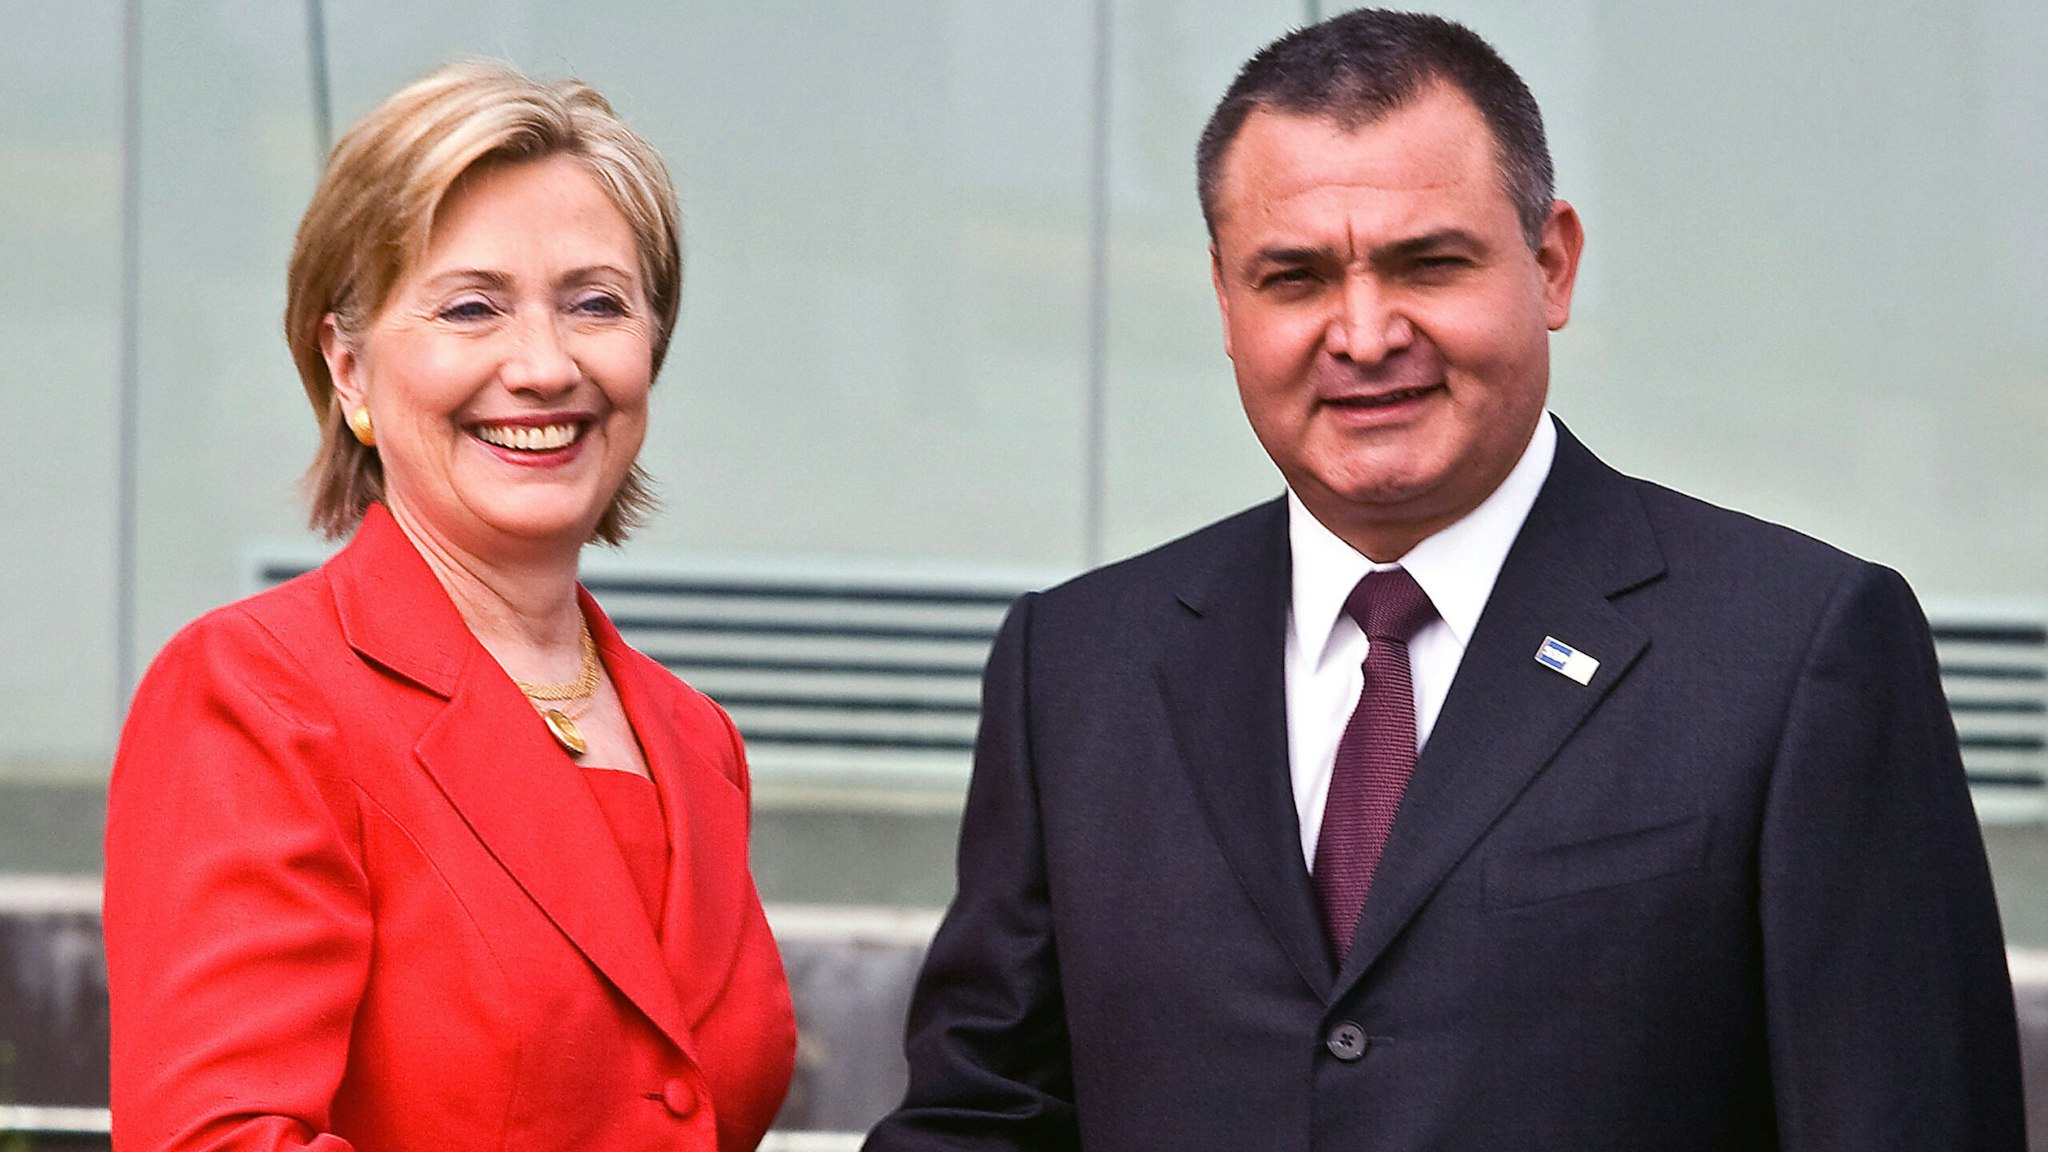 US Secretary of State Hillary Clinton shakes hands with the Secretary of the Federal Public Security Genaro Garcia Luna upon her arrival to the Center Command of the Mexican Federal Police in Mexico City, on March 26, 2009. Clinton is in Mexico for a two-day visit.